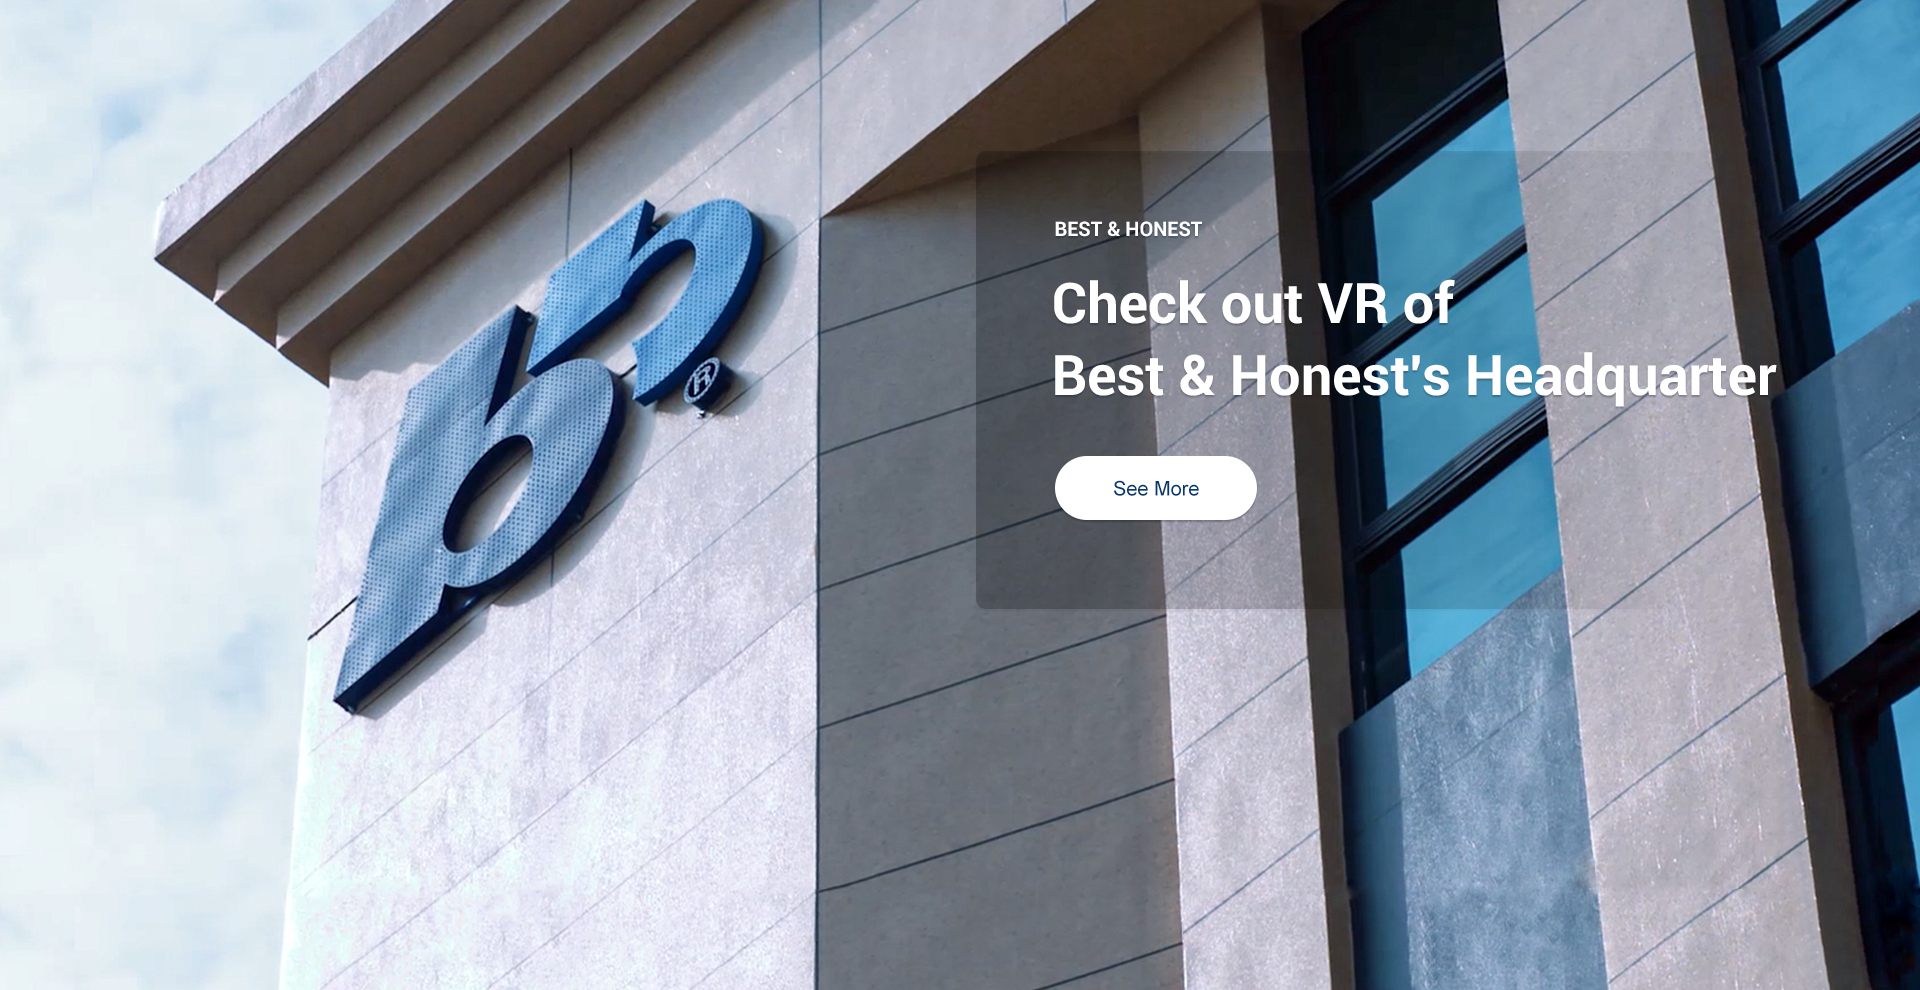 Check out VR of Best & Honest Headquarter.